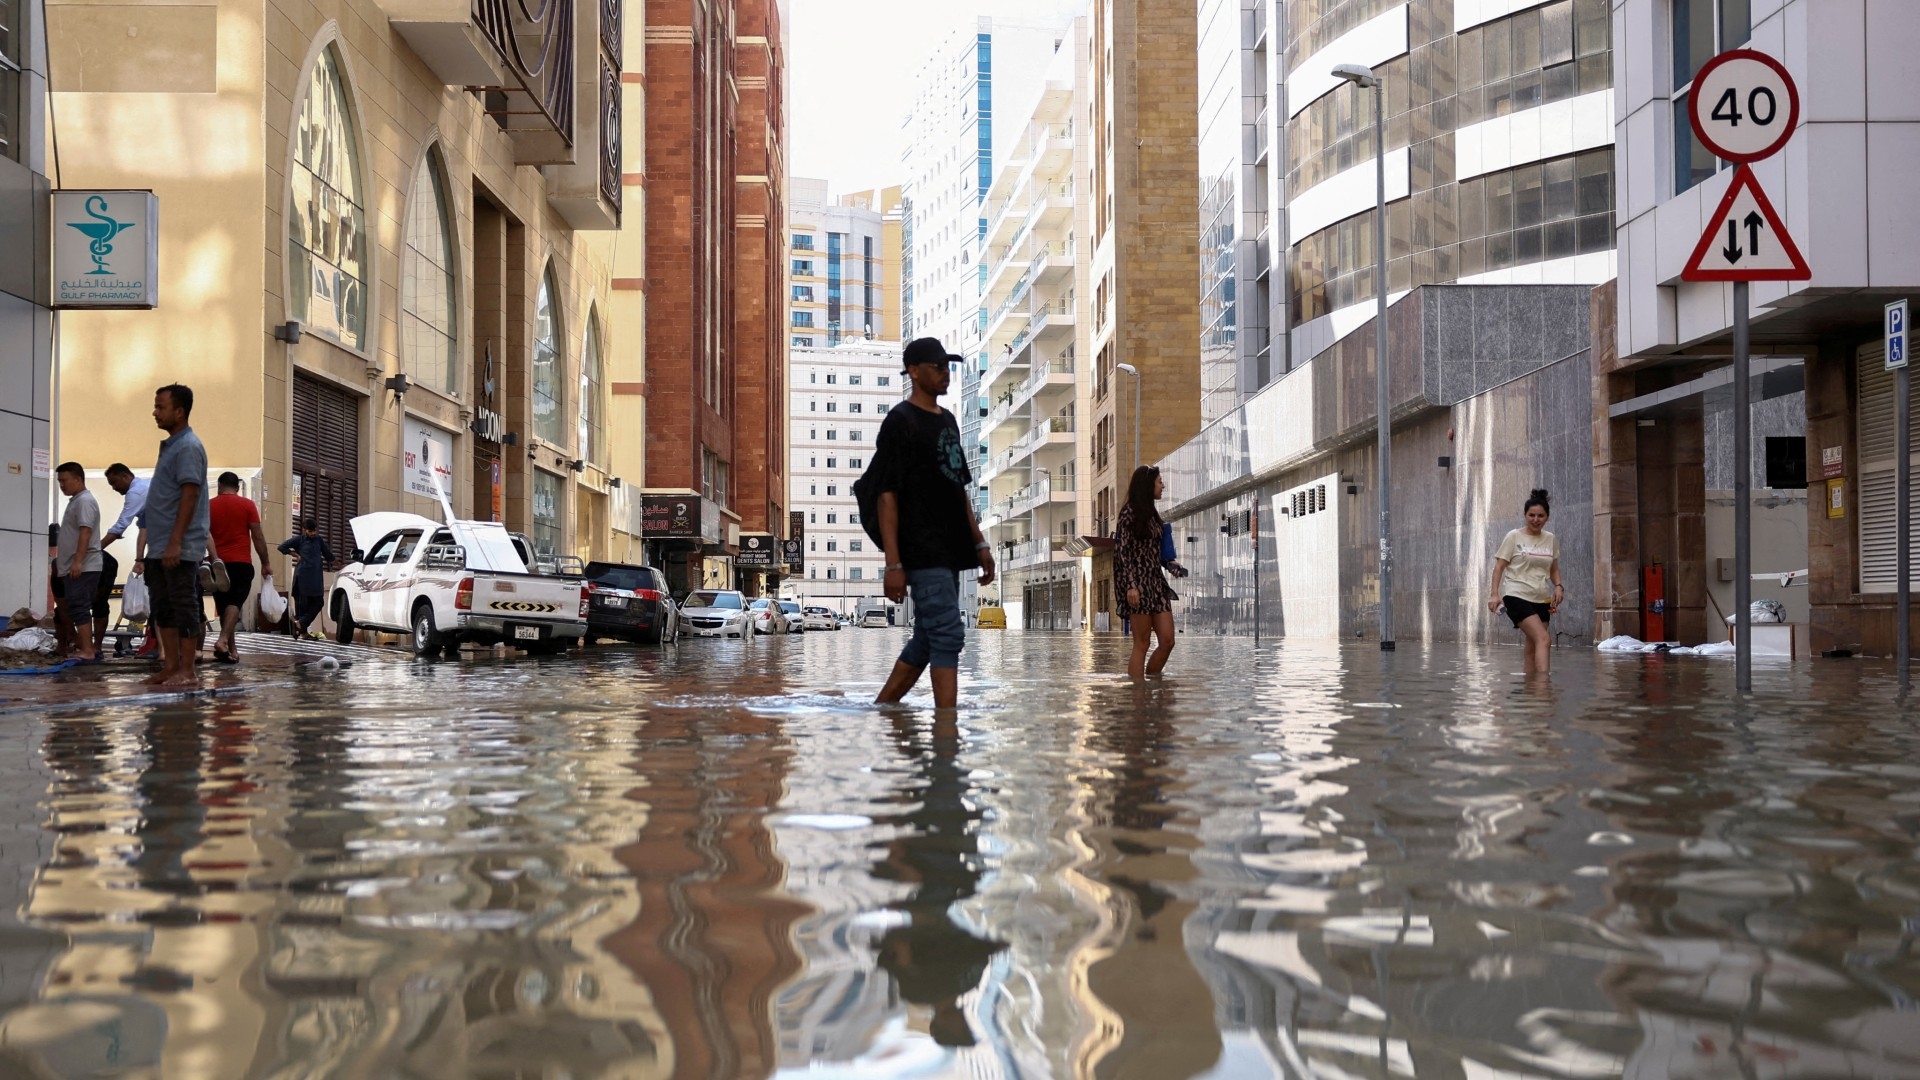 People walk through flood water caused by heavy rains, in Dubai, United Arab Emirates on 17 April 2024 (AFP/Amr Alfiky)